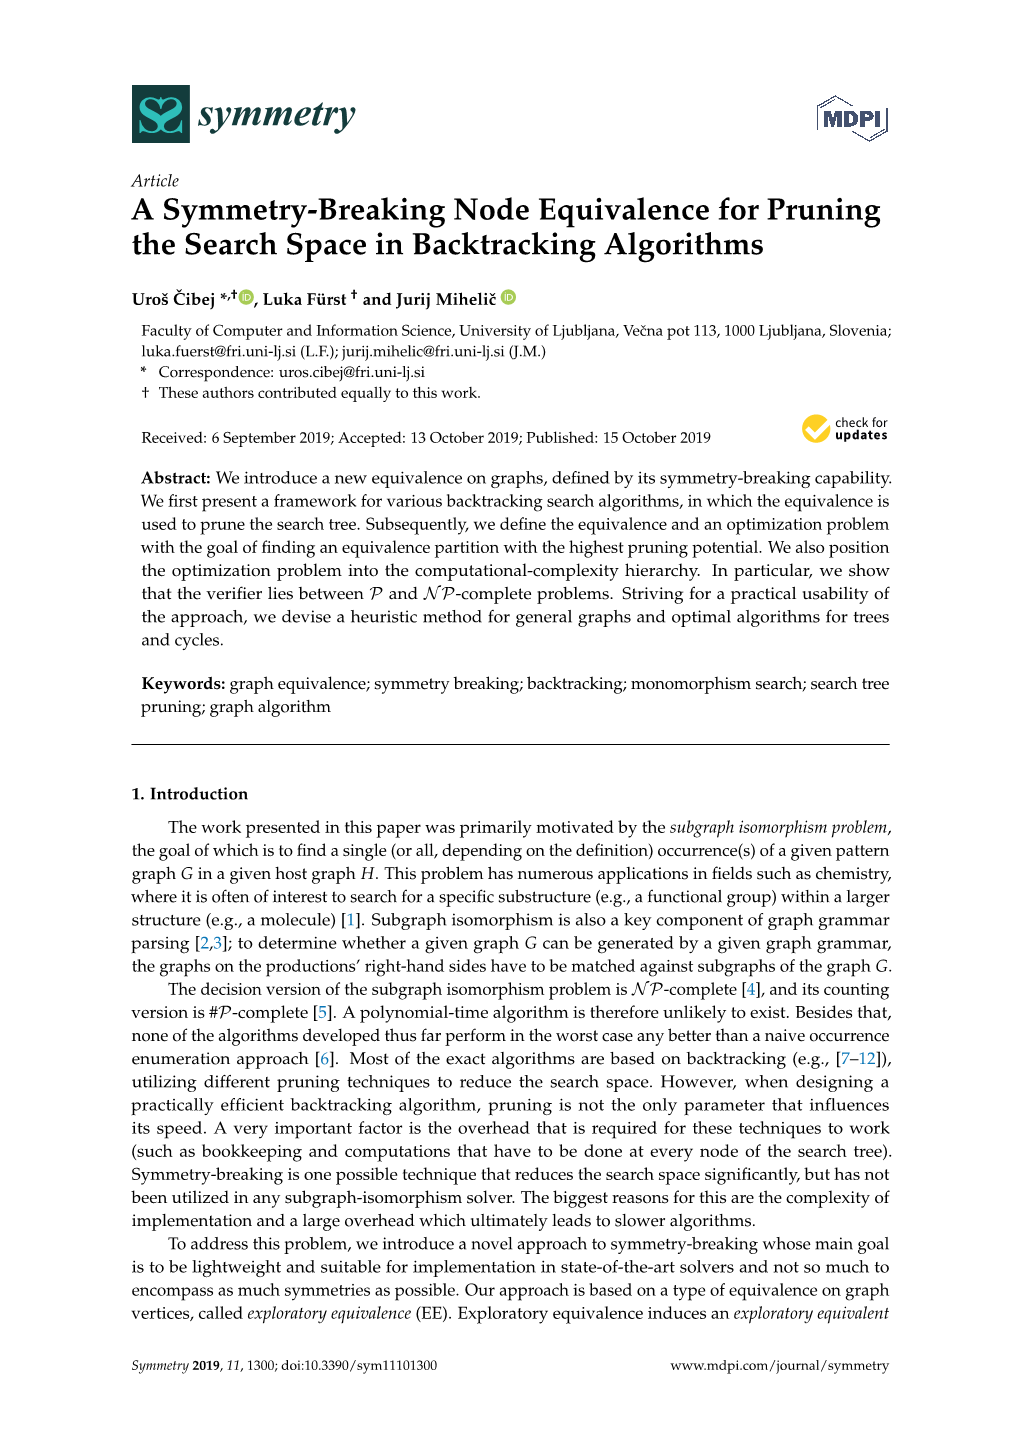 A Symmetry-Breaking Node Equivalence for Pruning the Search Space in Backtracking Algorithms